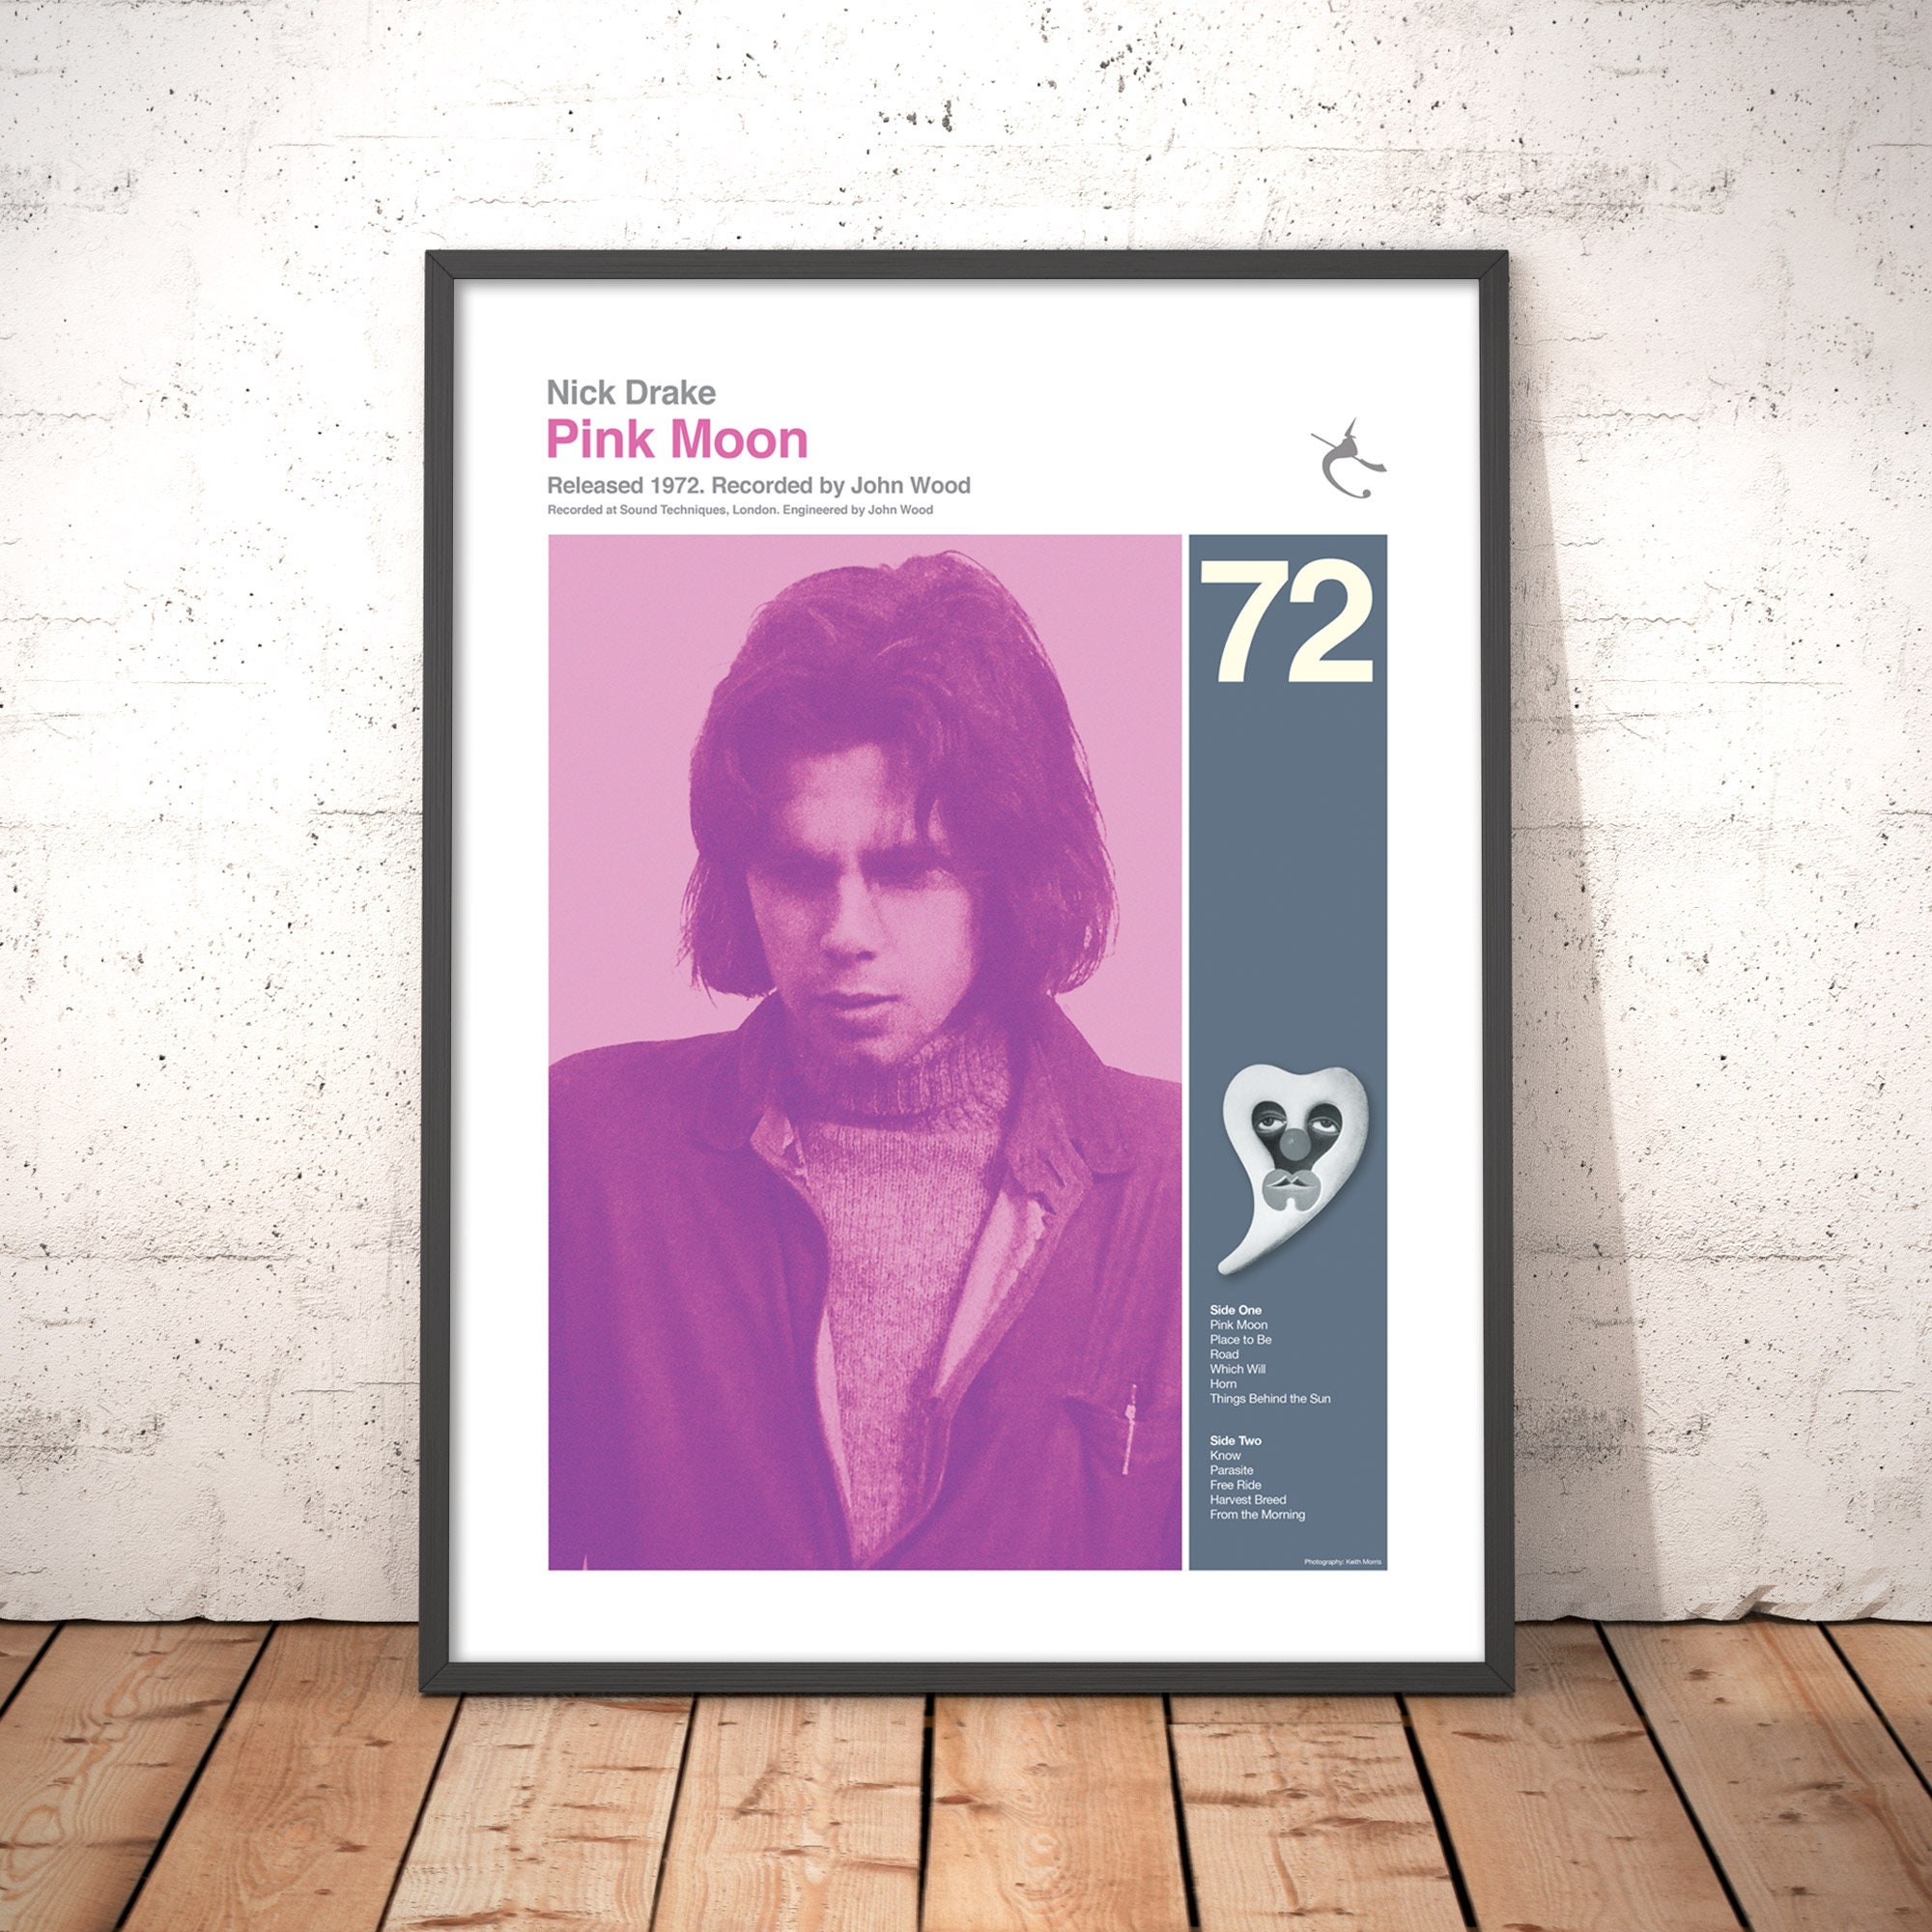 Way To Blue: The Songs Of Nick Drake, Album Preview